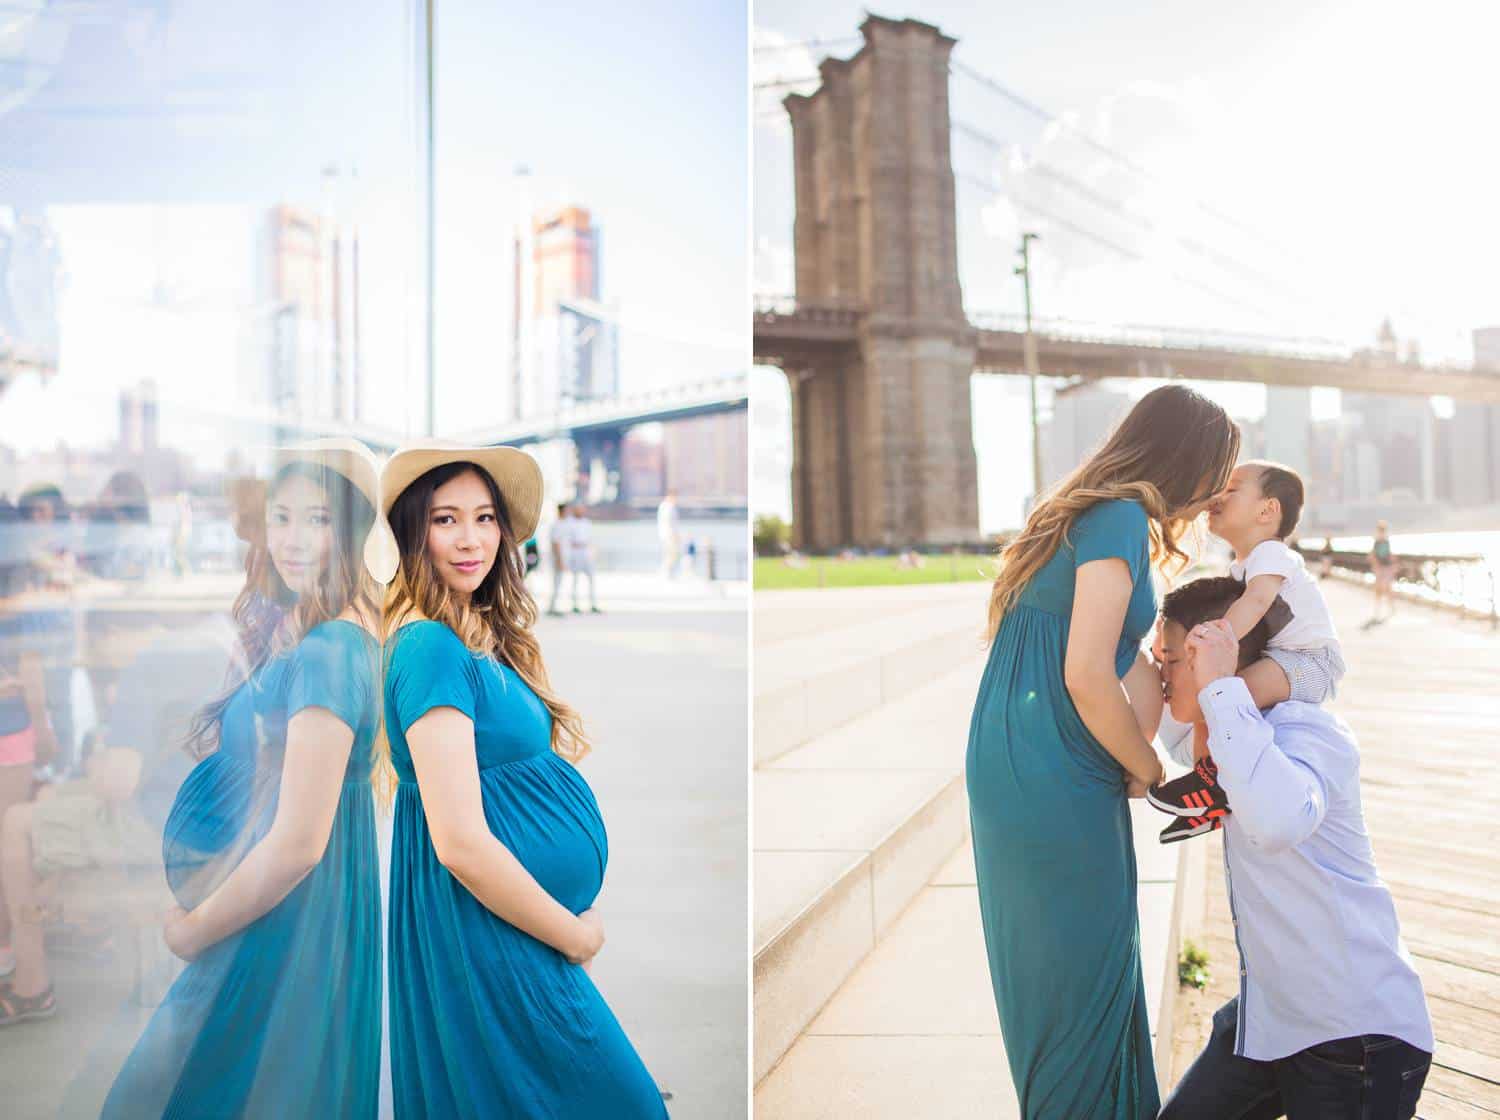 A pregnant woman in a teal blue gown poses first against a glass wall, where her reflection echos her pose. Next, she poses in a portrait with her partner and child. The child sits on the partner's shoulders, and Mom leans in to kiss the baby on the forehead. The Brooklyn Bridge appears in the background.